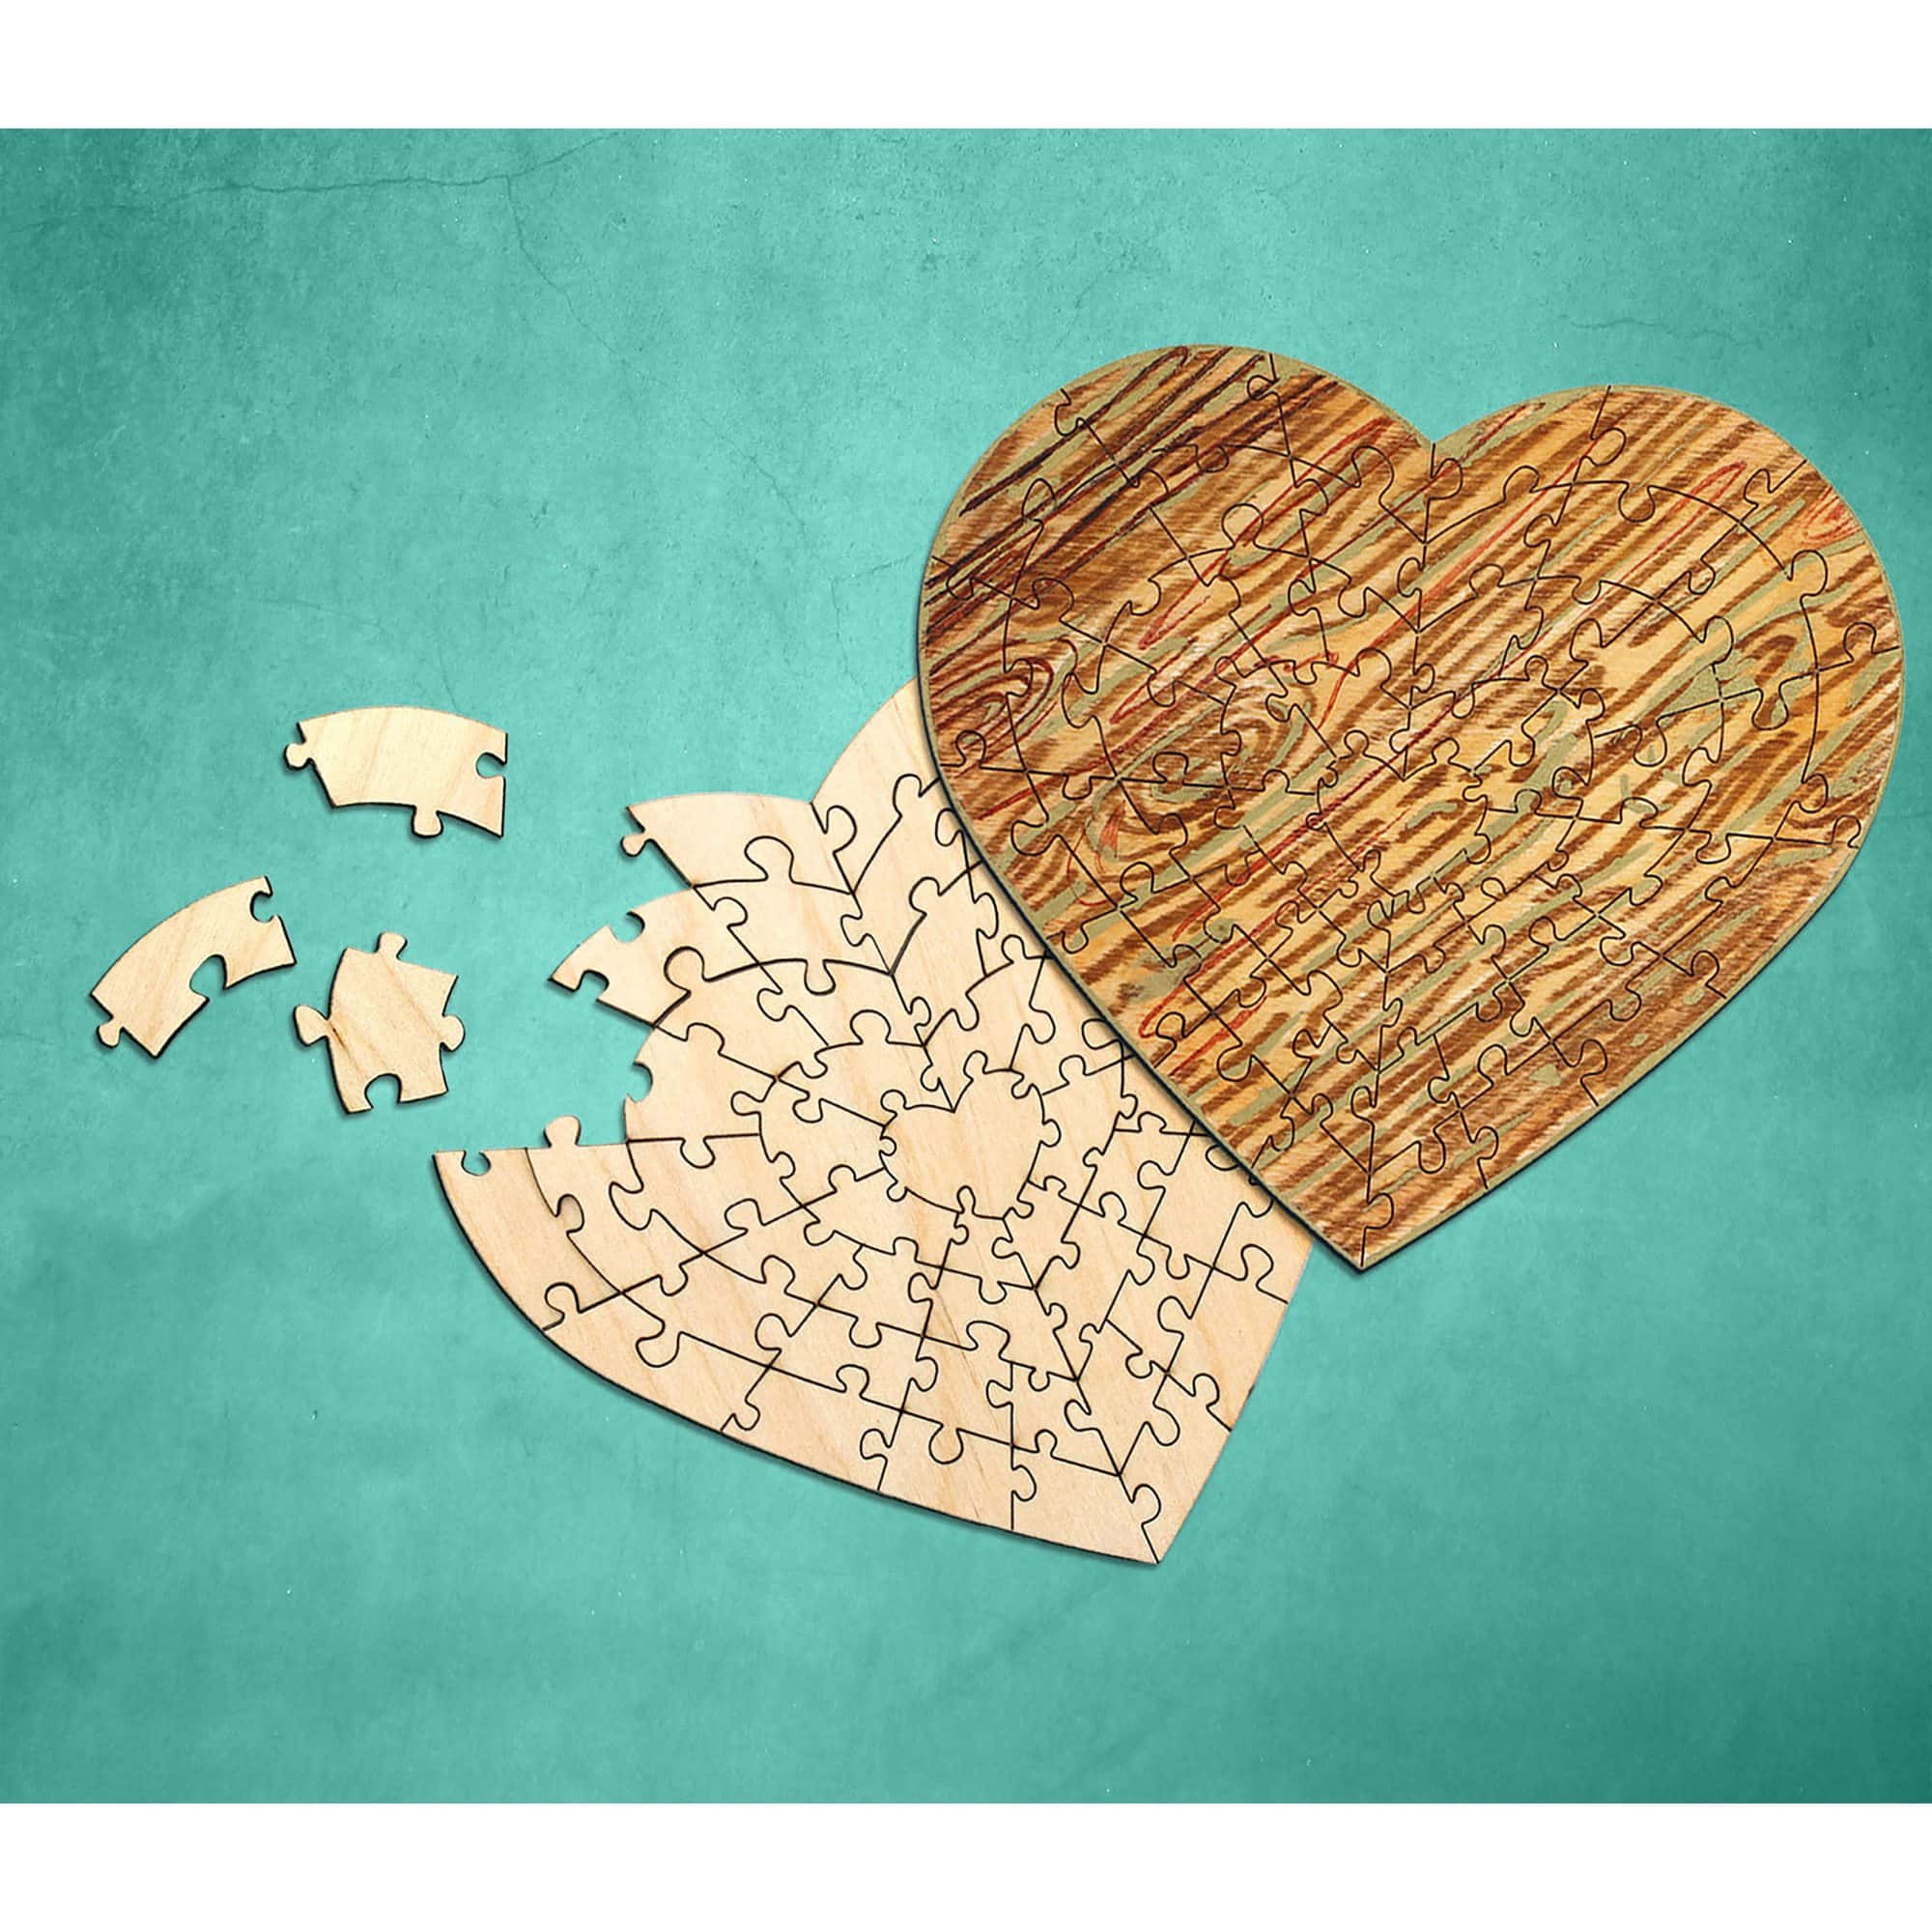 Leisure Arts&#xAE; Small Heart D.I.Y. Wood Puzzle